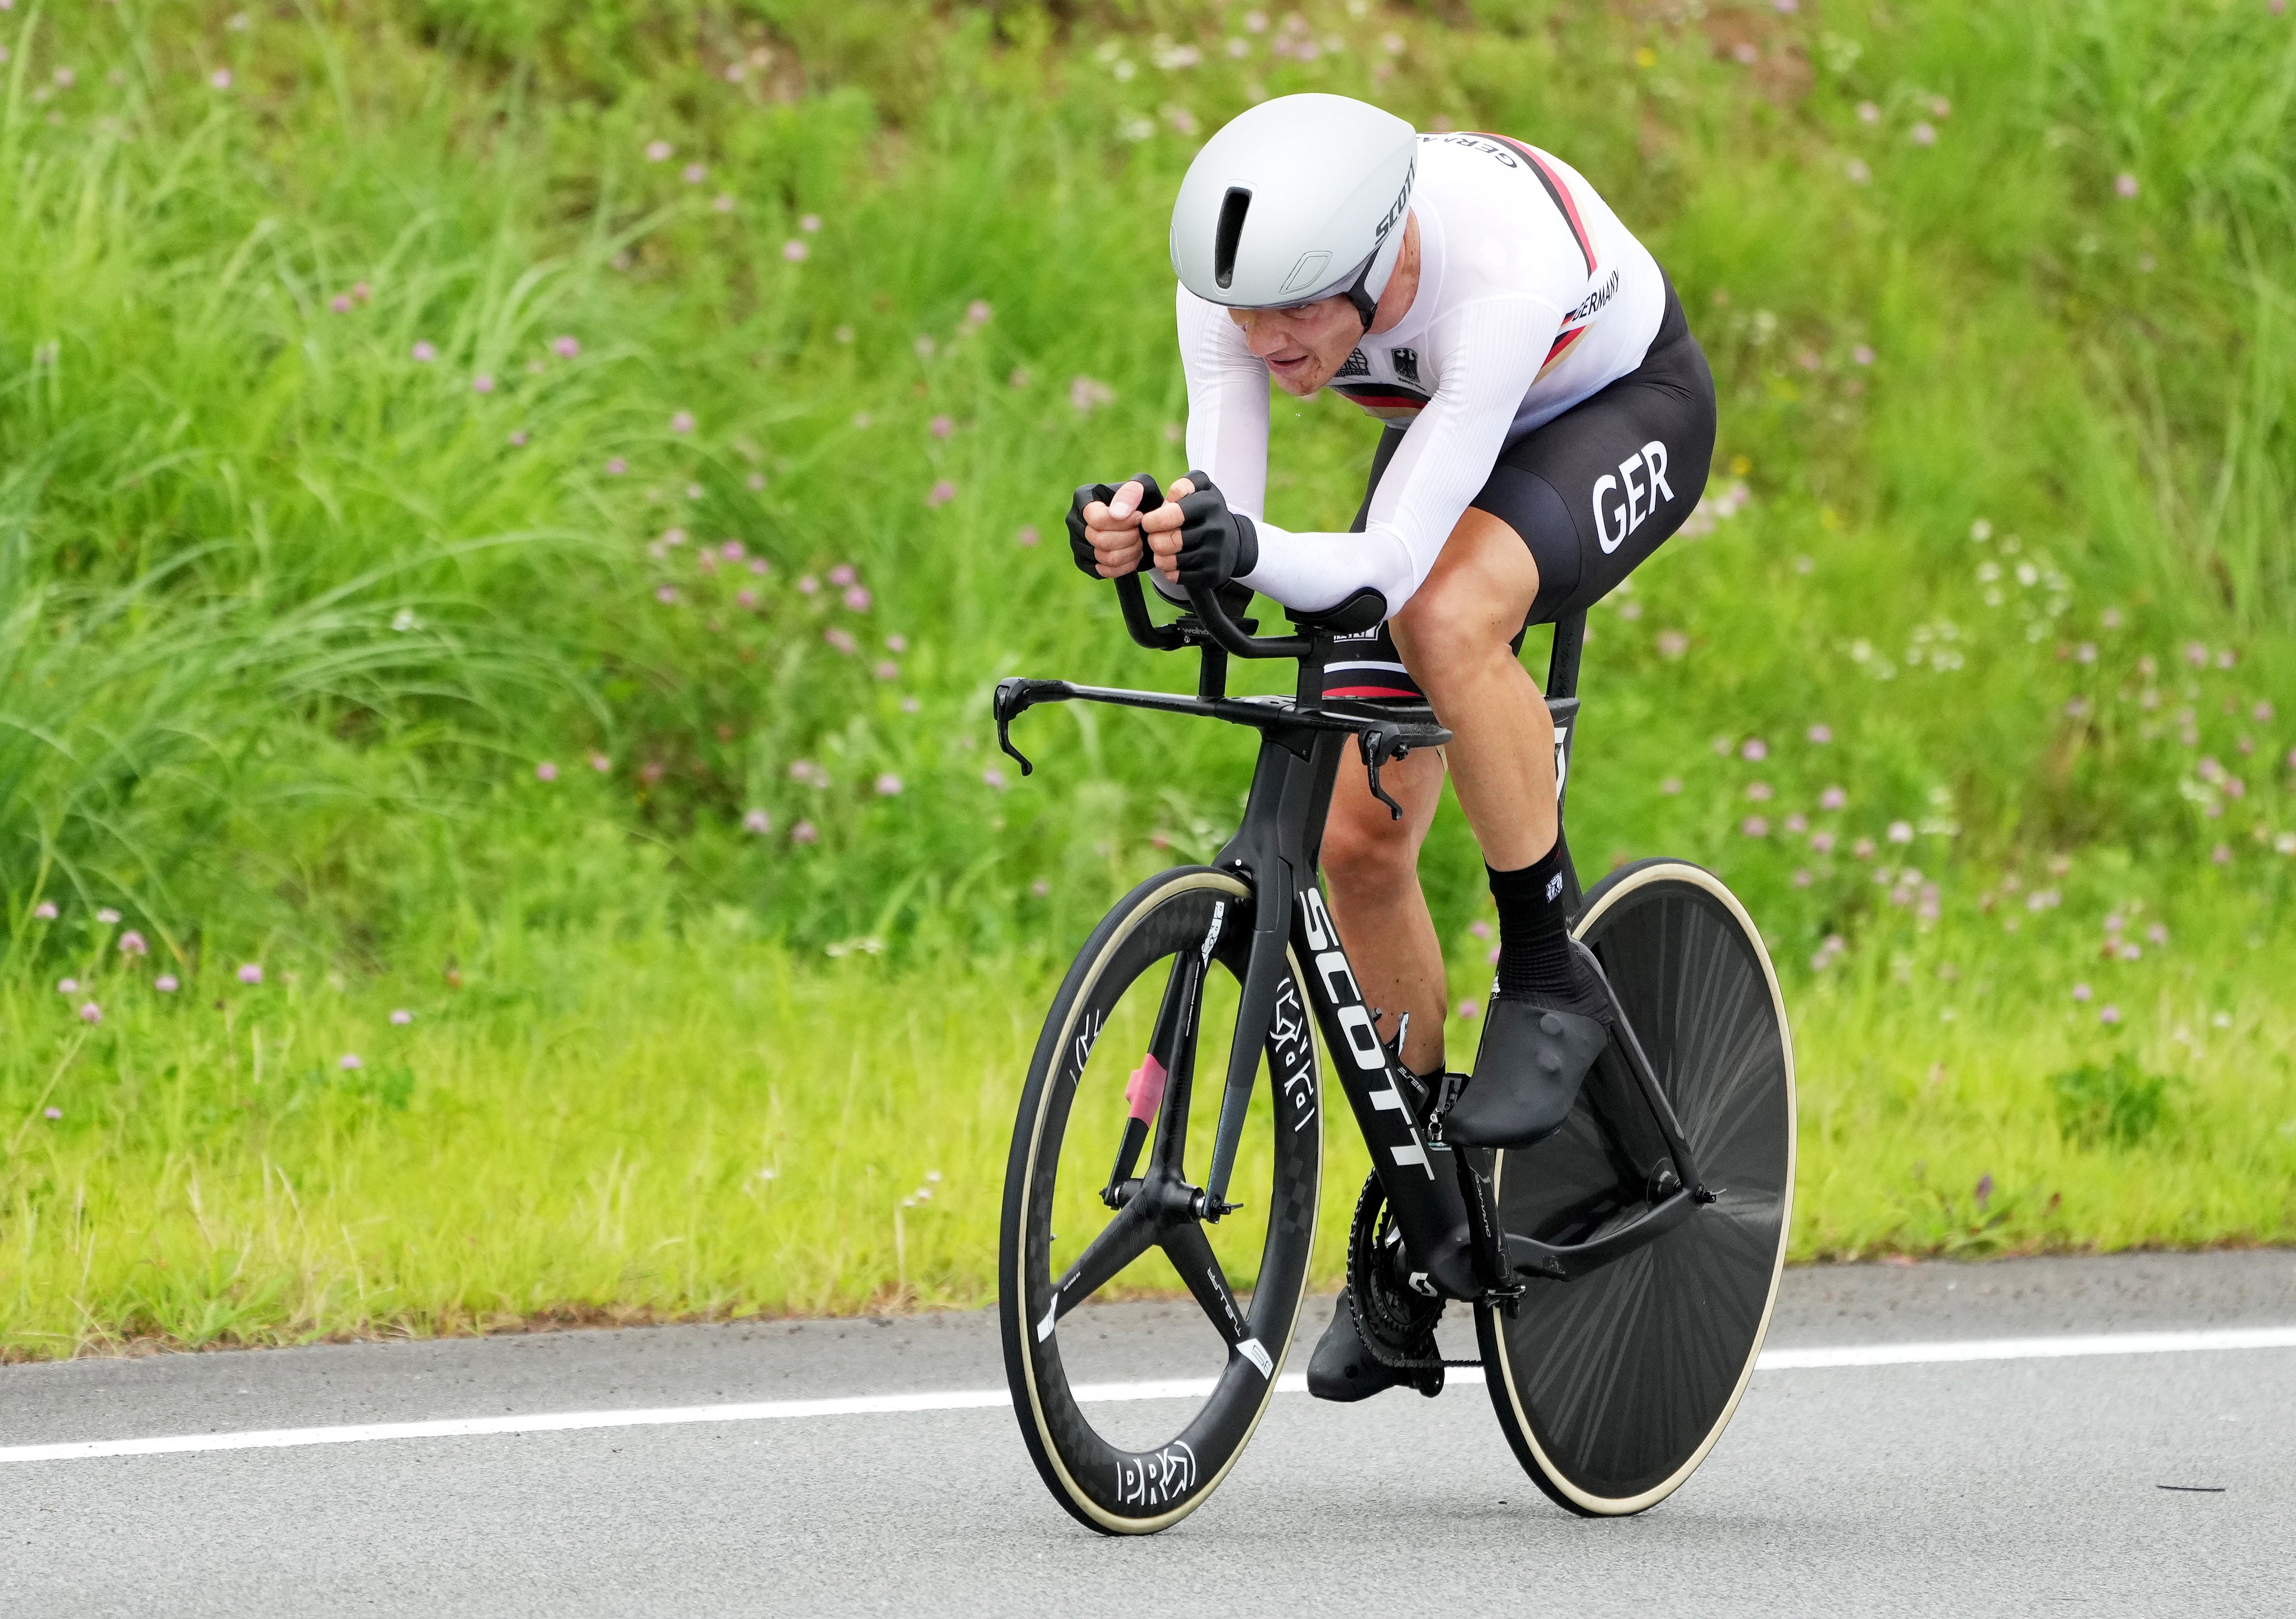 Nikias Arndt of Germany competes in the Men's Road Cycling Time Trial at the Tokyo 2020 Olympic Games at the Fuji International Speedway in Oyama, Japan